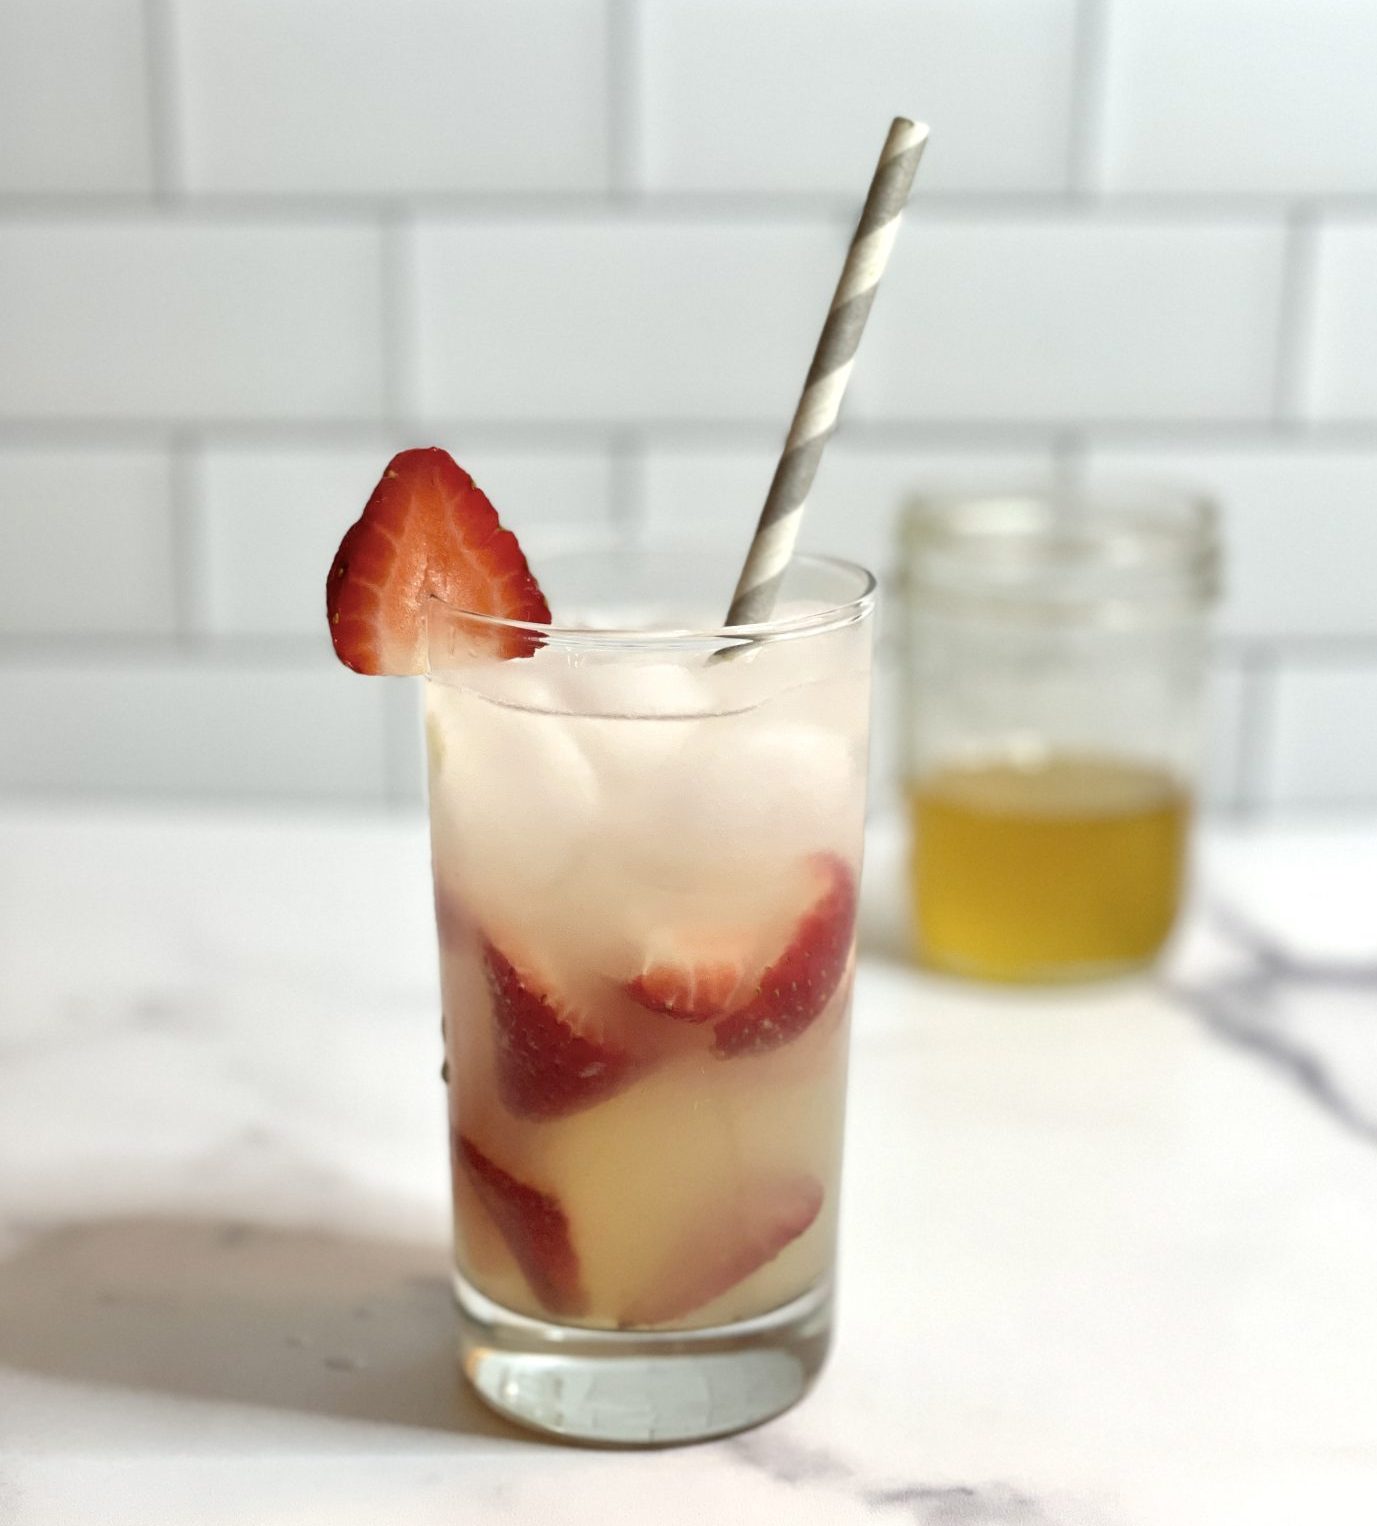 A highball glass with a strawberry filled cocktail. In the background is a jar of honey.